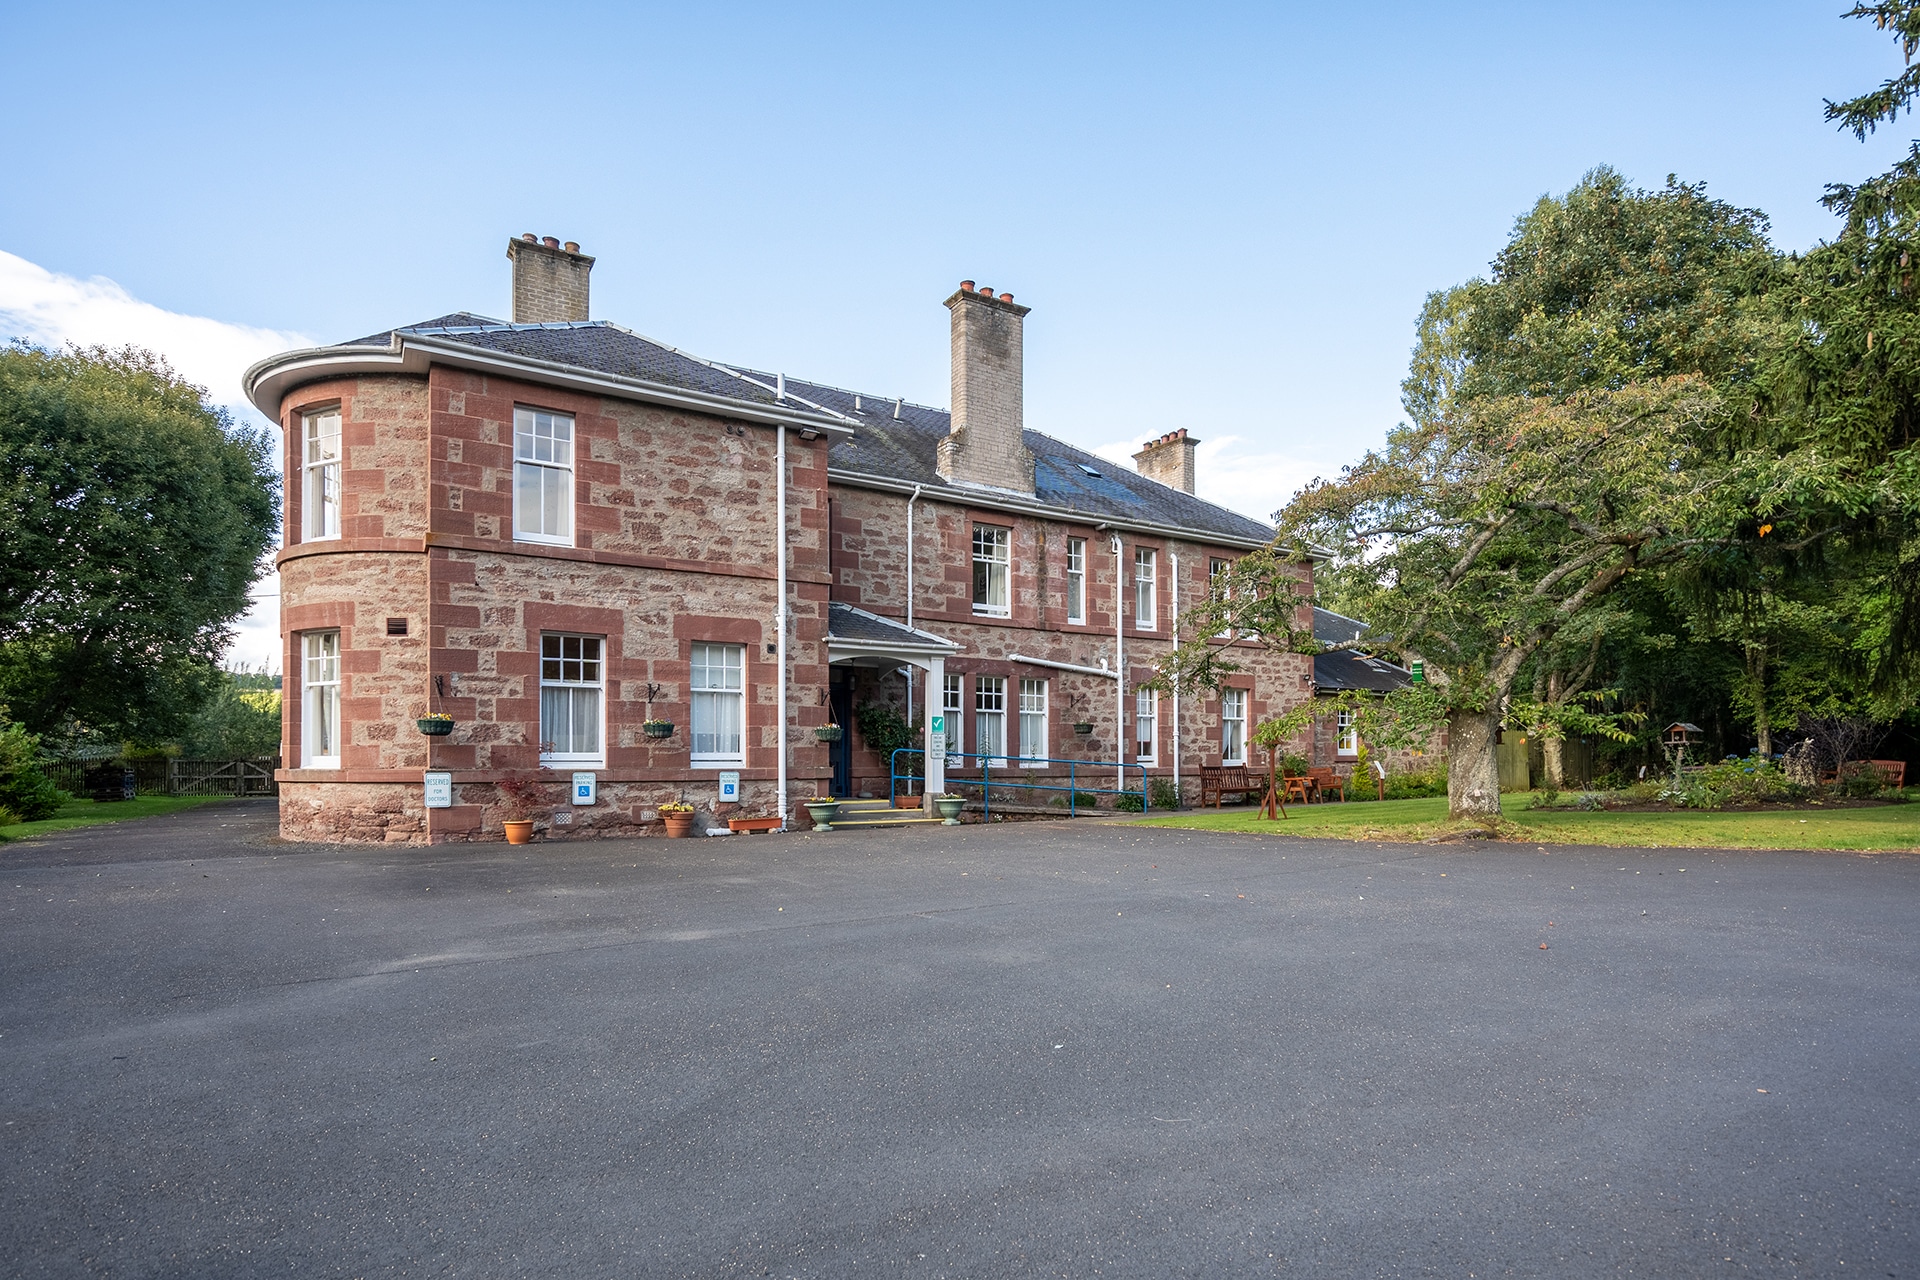 The front of the original mansion house at Muirton House Care Home in Blairgowrie.